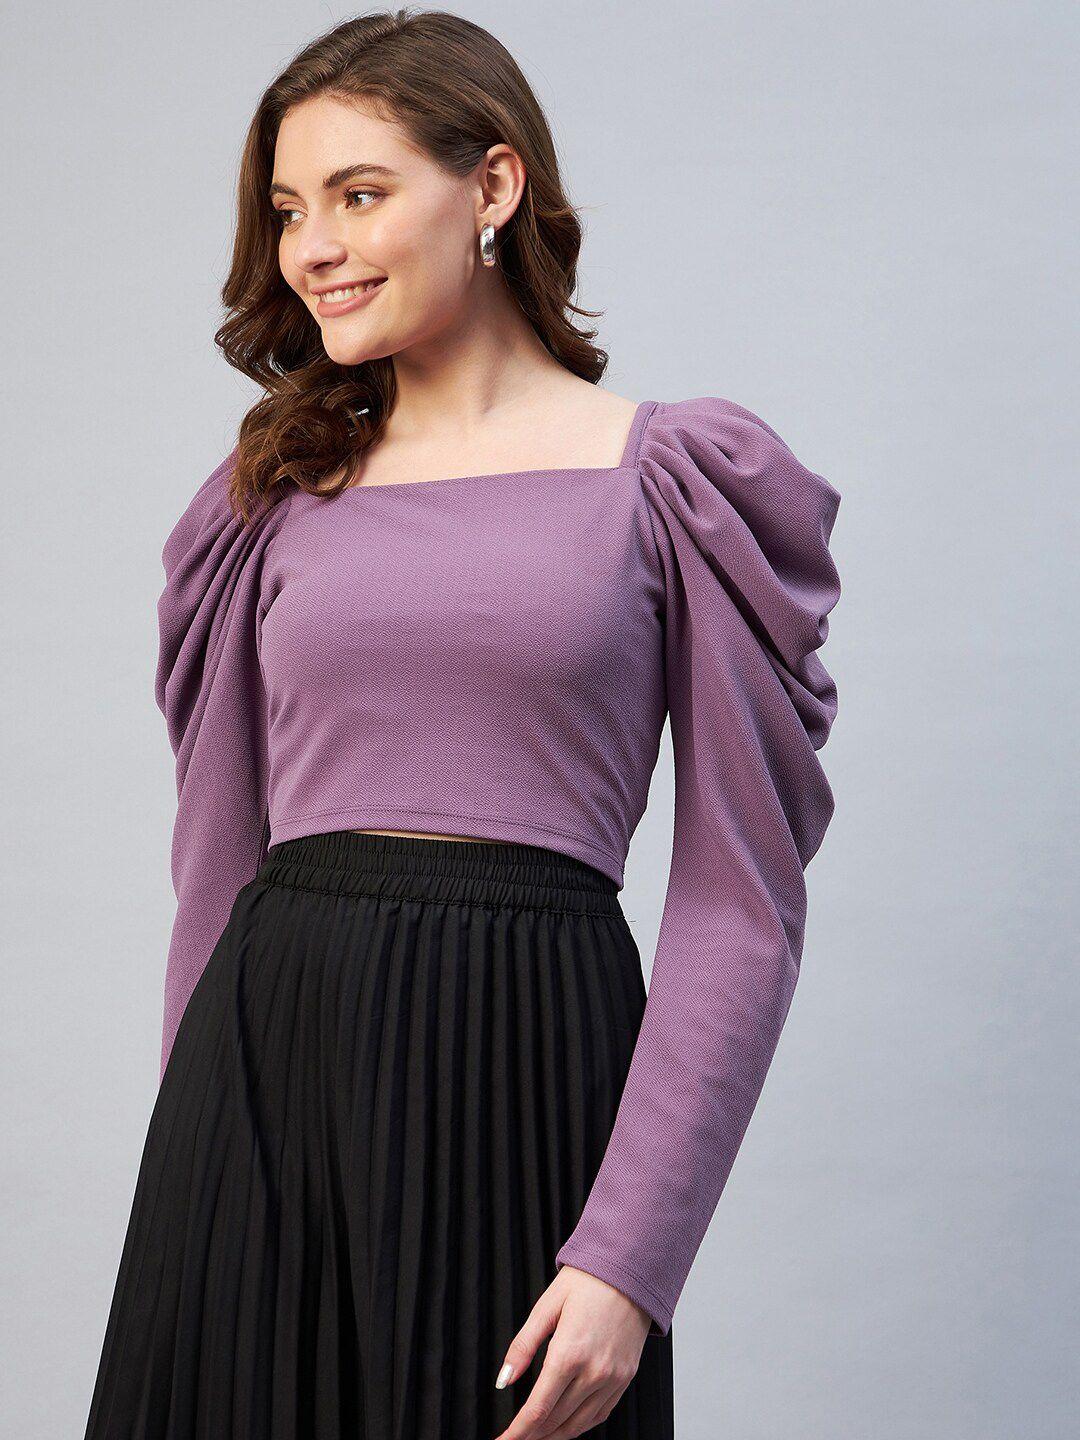 marie claire lavender puff sleeves crop top